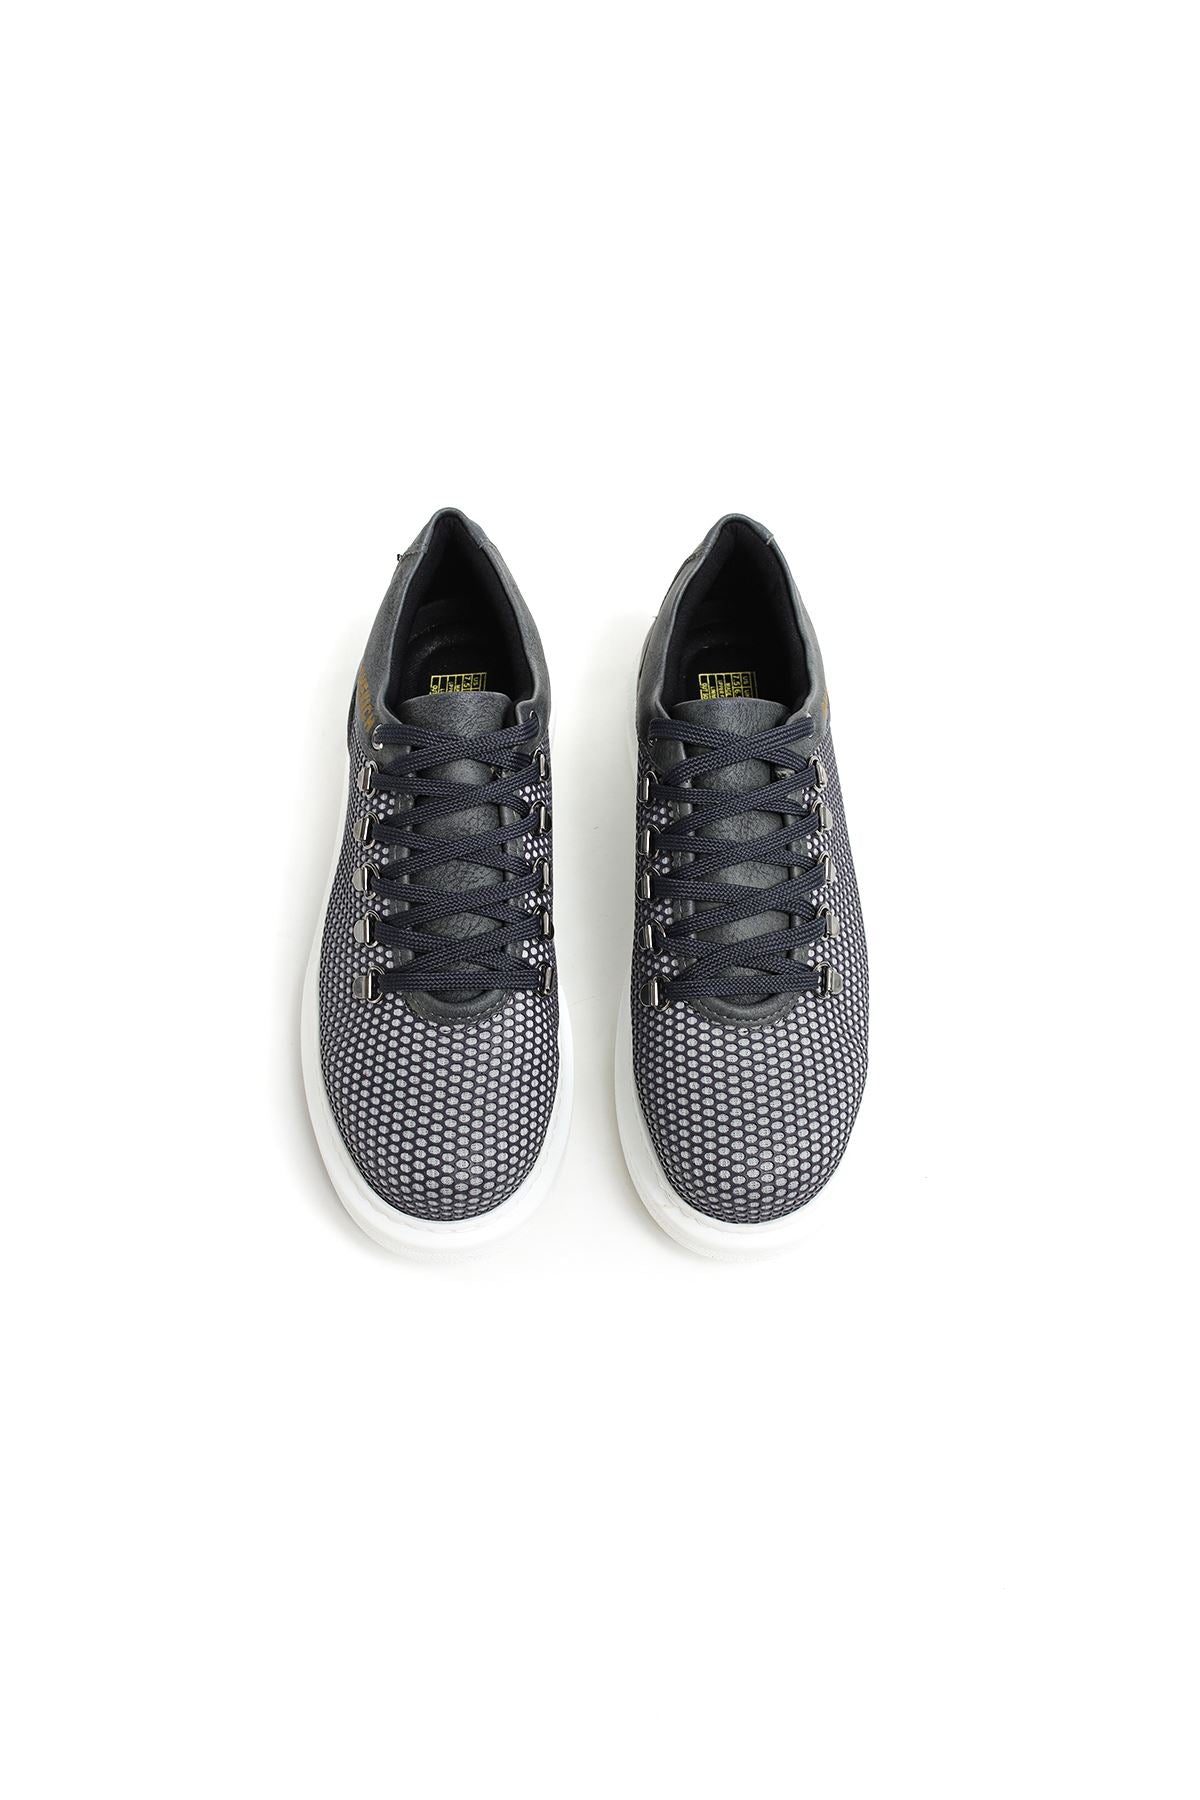 CH021 Men's Unisex Grey-White Sole Honeycomb Processing Casual Sneaker Sports Shoes - STREETMODE ™